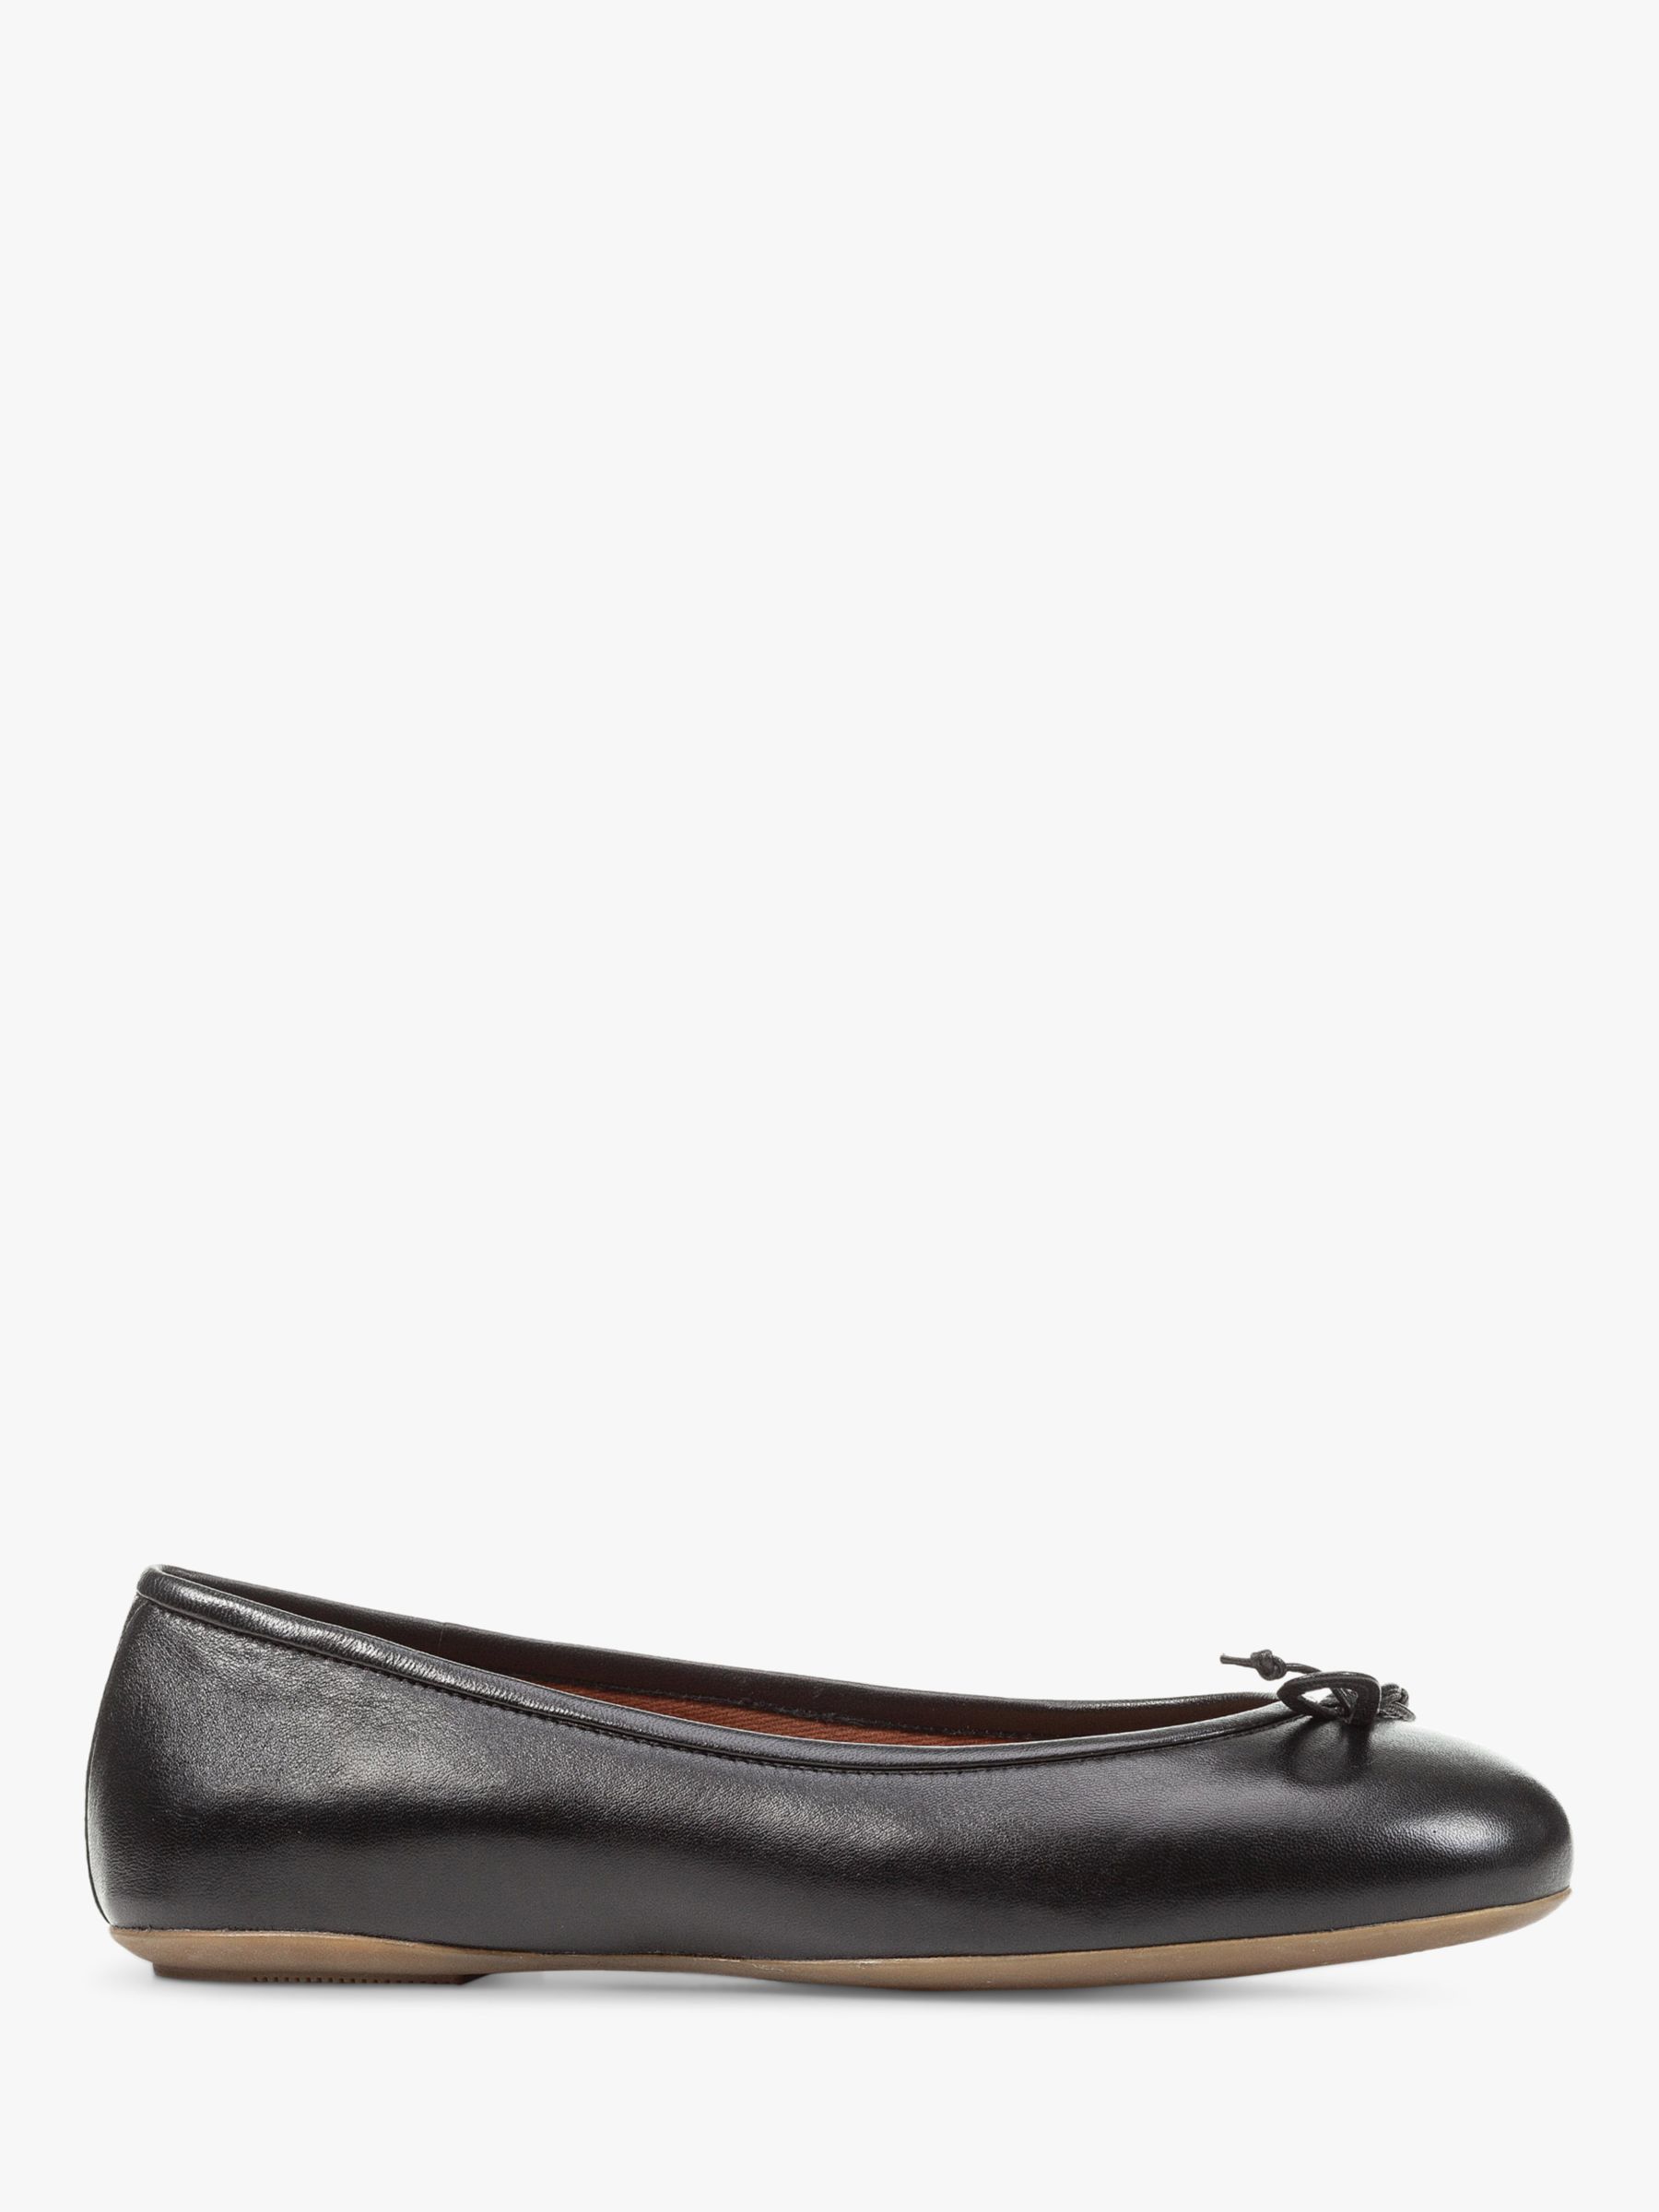 Buy Geox Palmaria Leather Ballerina Shoes, Black Online at johnlewis.com